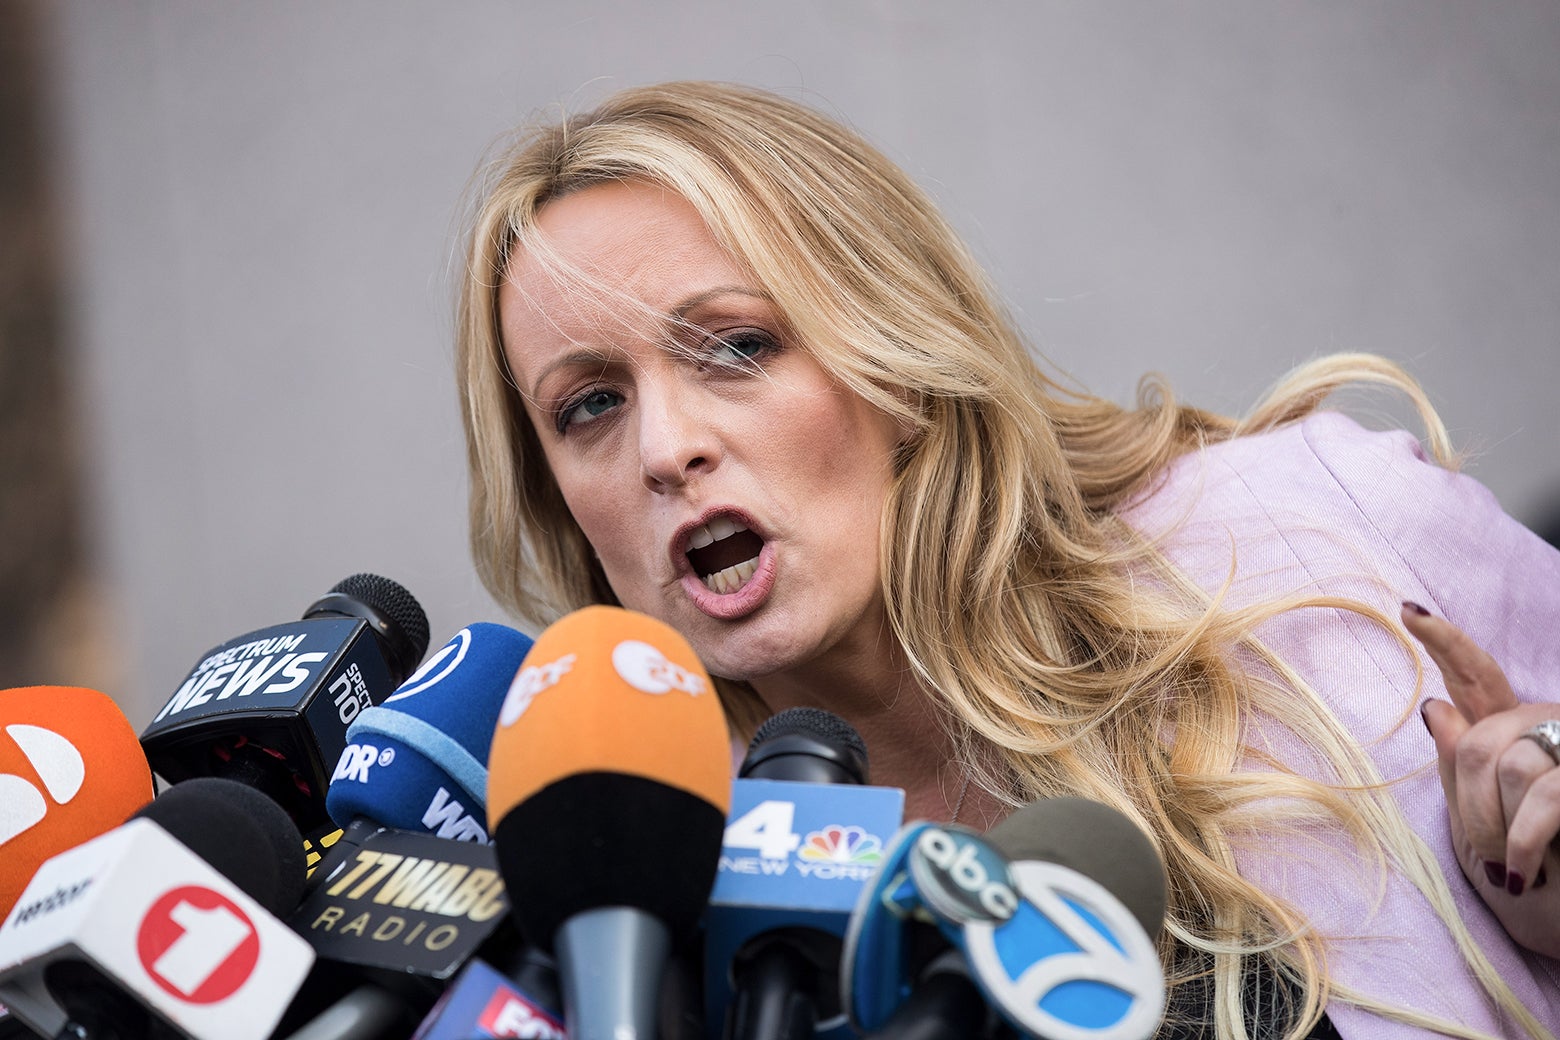 Stormy Daniels pointing and speaking into a scrum of microphones.